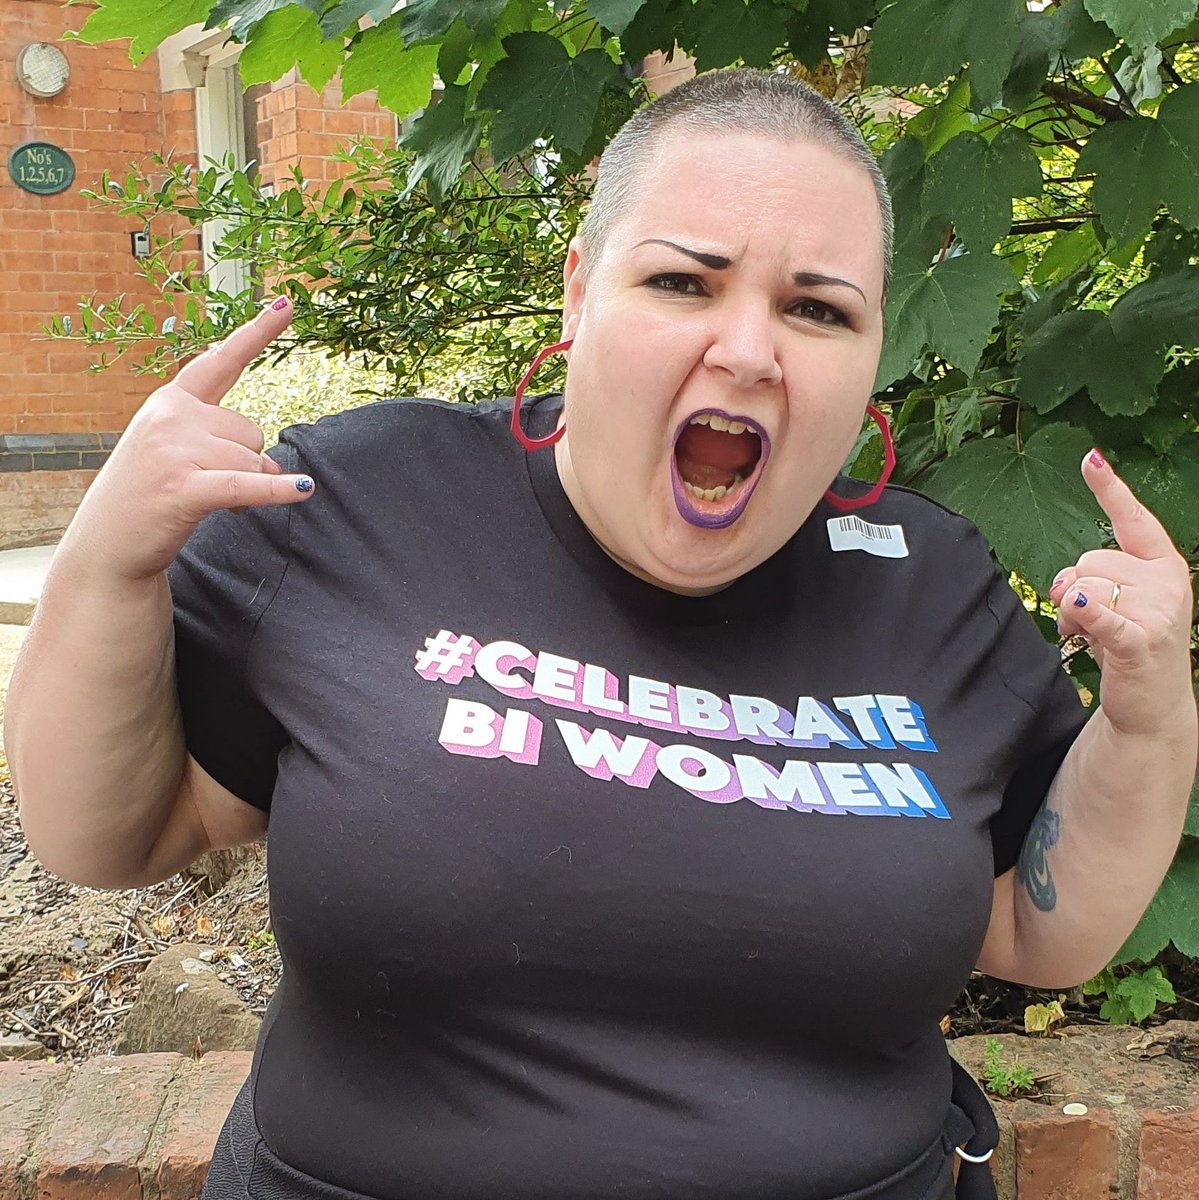 Ready to  #CelebrateBiWomen? Shirt made by  @RainbowandCoUK Modelled by  @LibbyLights  by  @we_are_biscuit Get your own:  https://rainbowandco.uk/products/celebratebiwomen-t-shirt(PLEASE RT)  #BeautifullyBisexual 